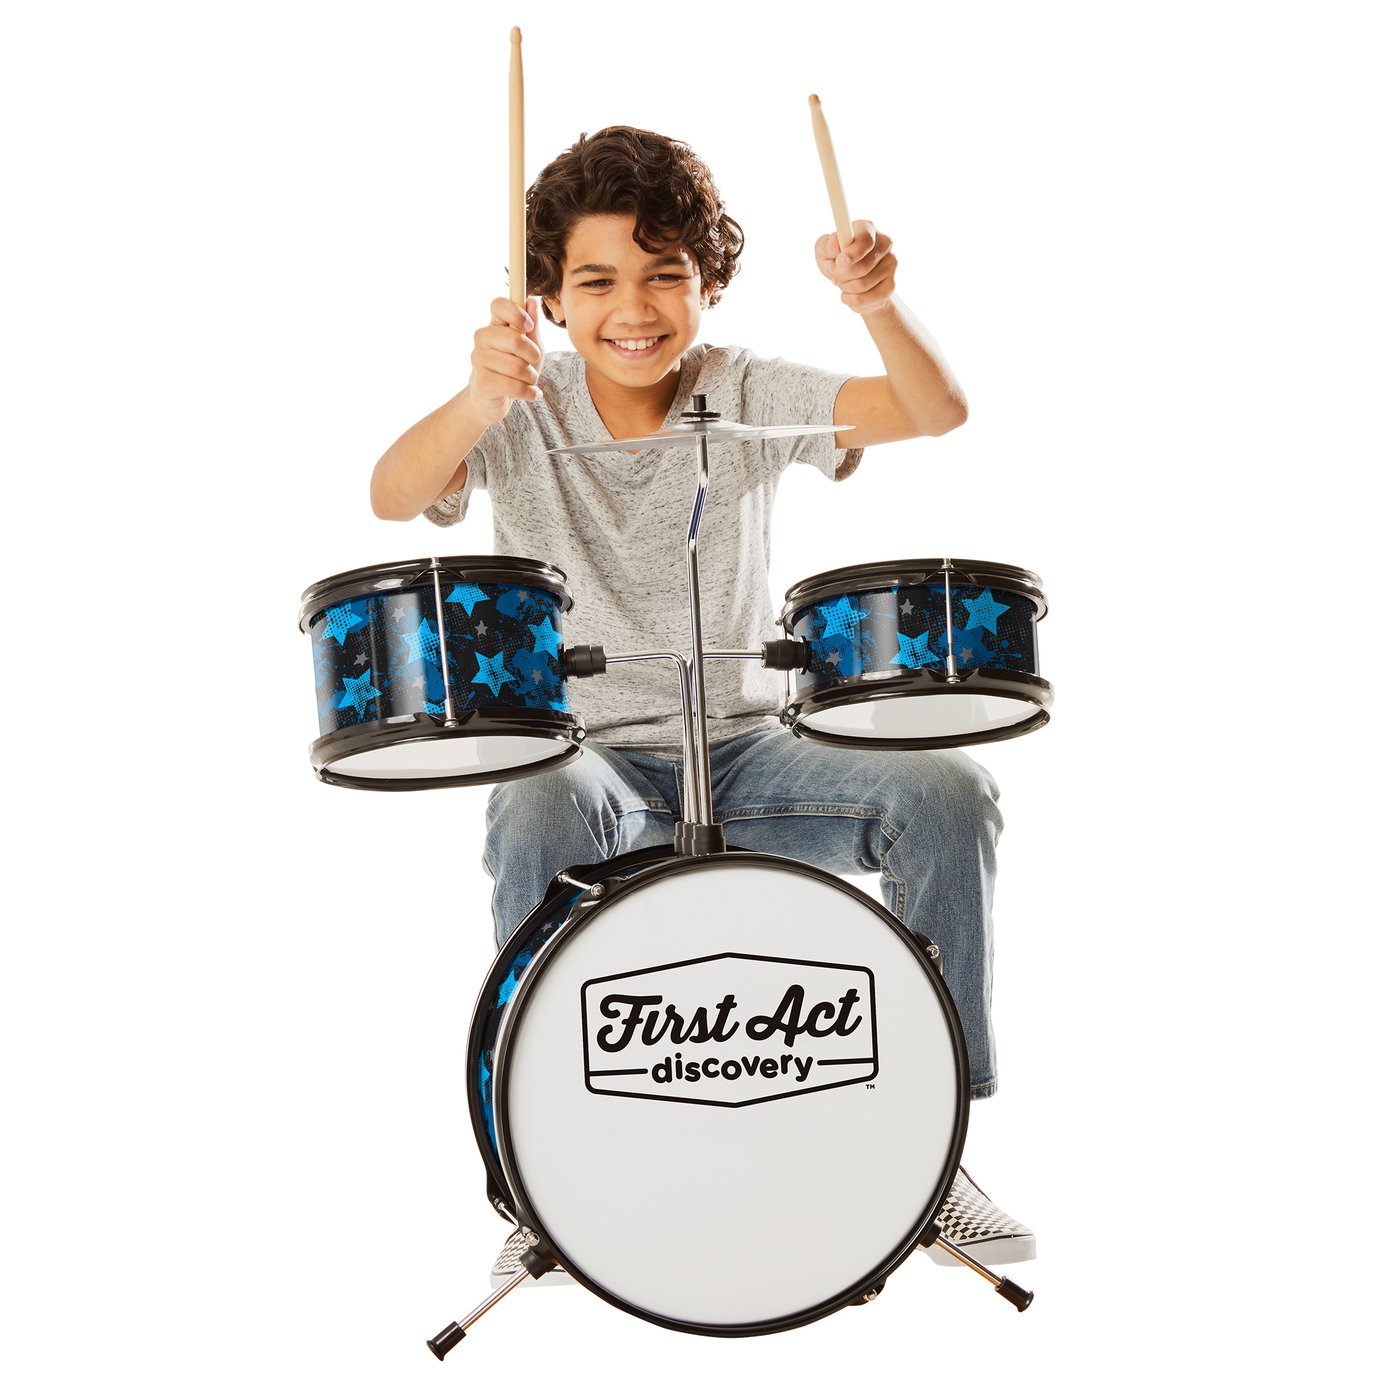 First Act Drum Kit Review